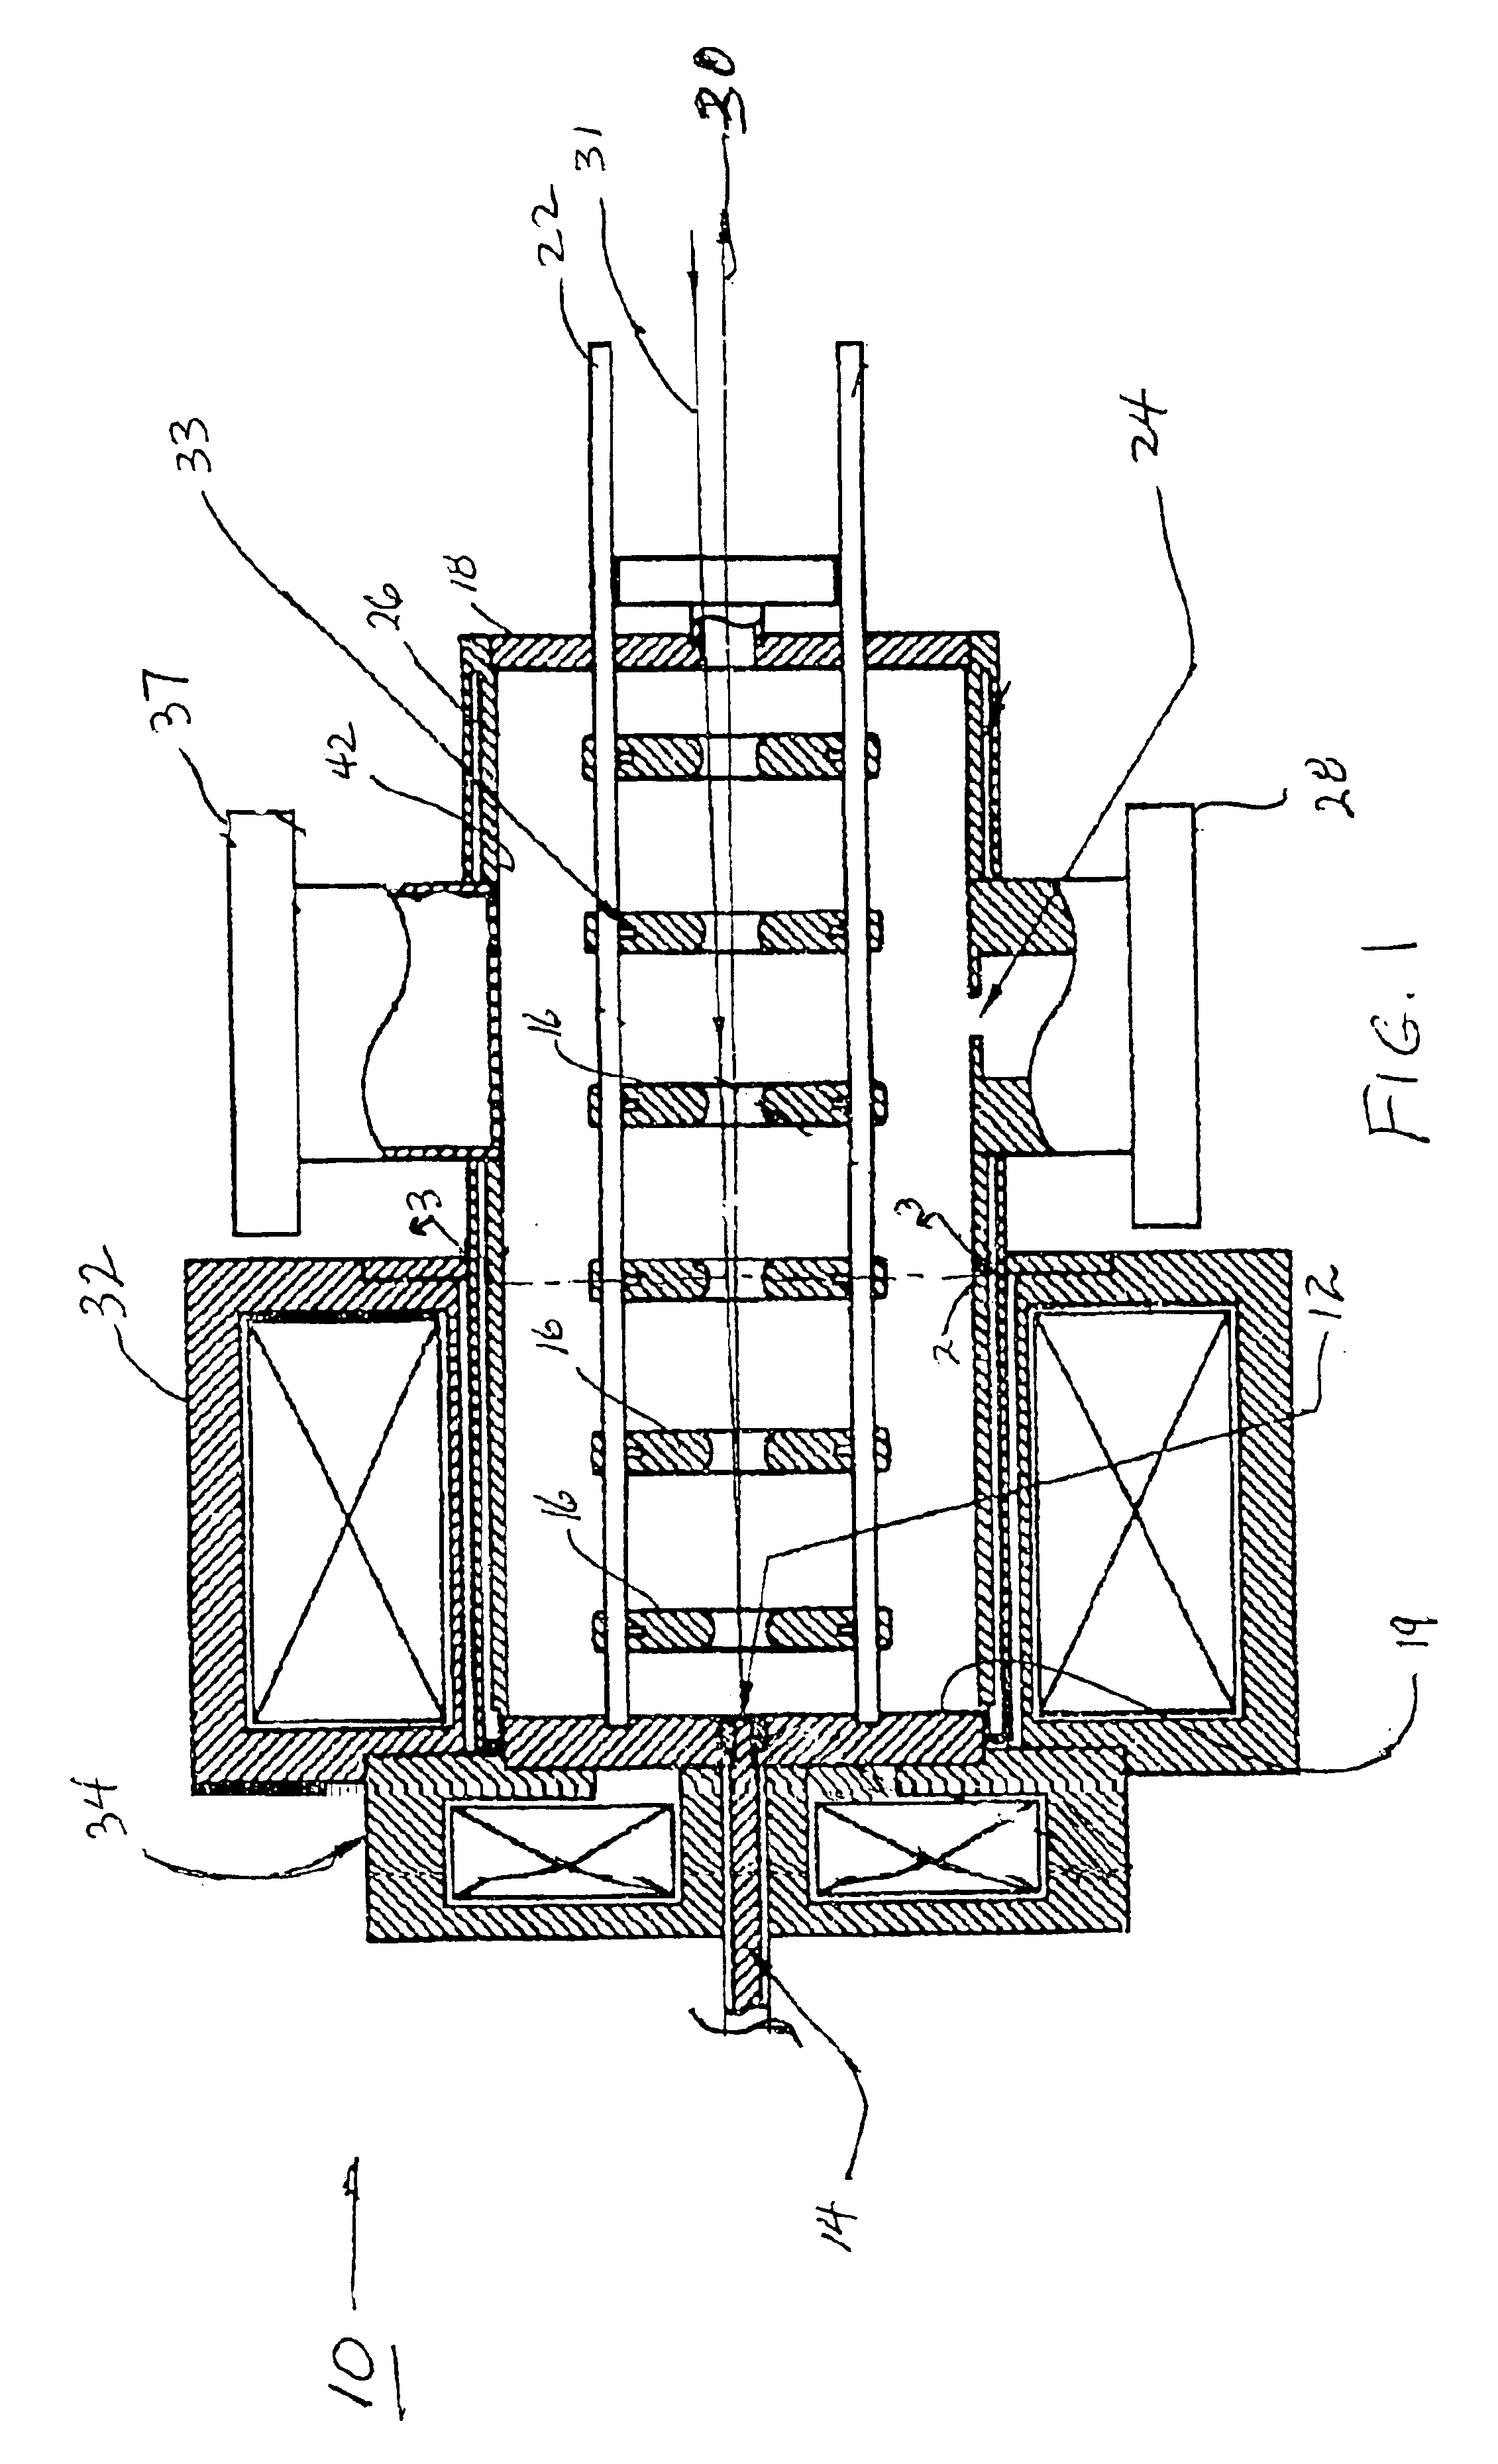 Photoelectron linear accelerator for producing a low emittance polarized electron beam